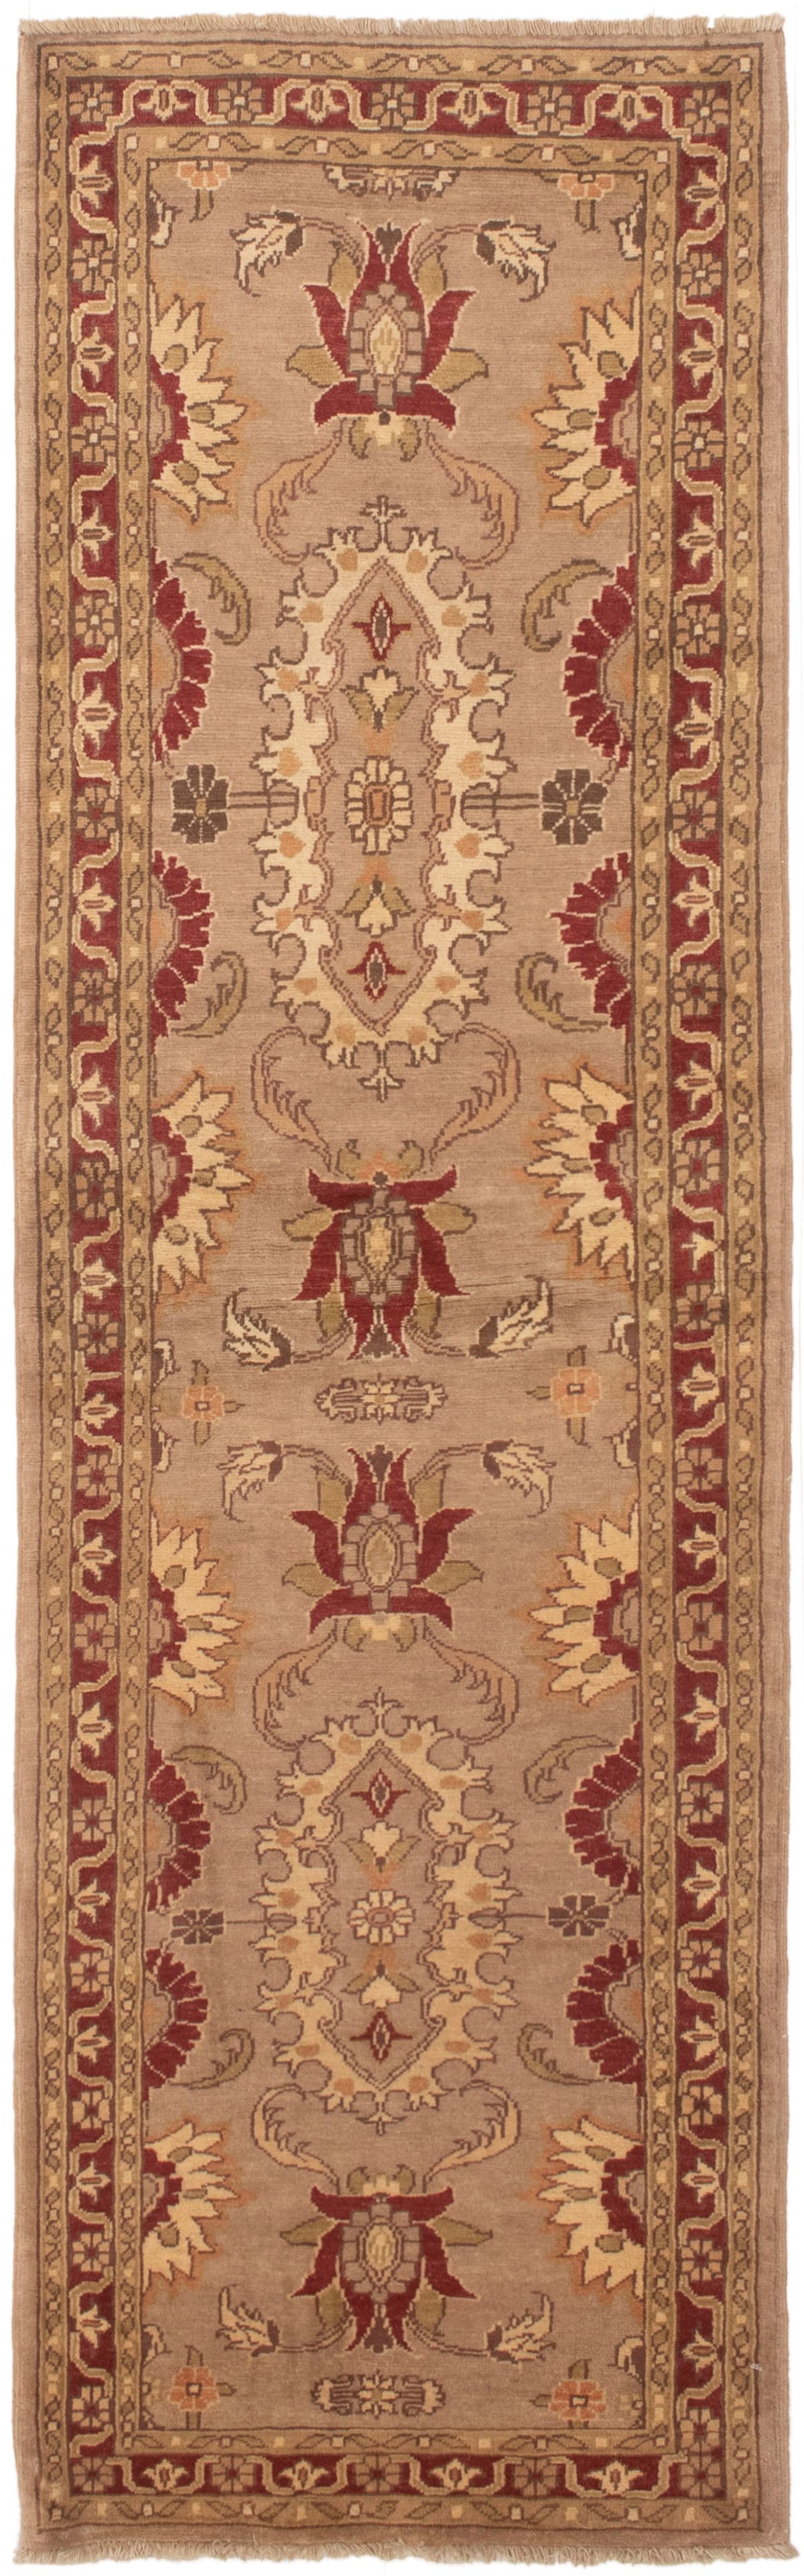 Hand-knotted Chobi Finest Cream, Light Brown Wool Rug 2'7" x 8'5" Size: 2'7" x 8'5"  